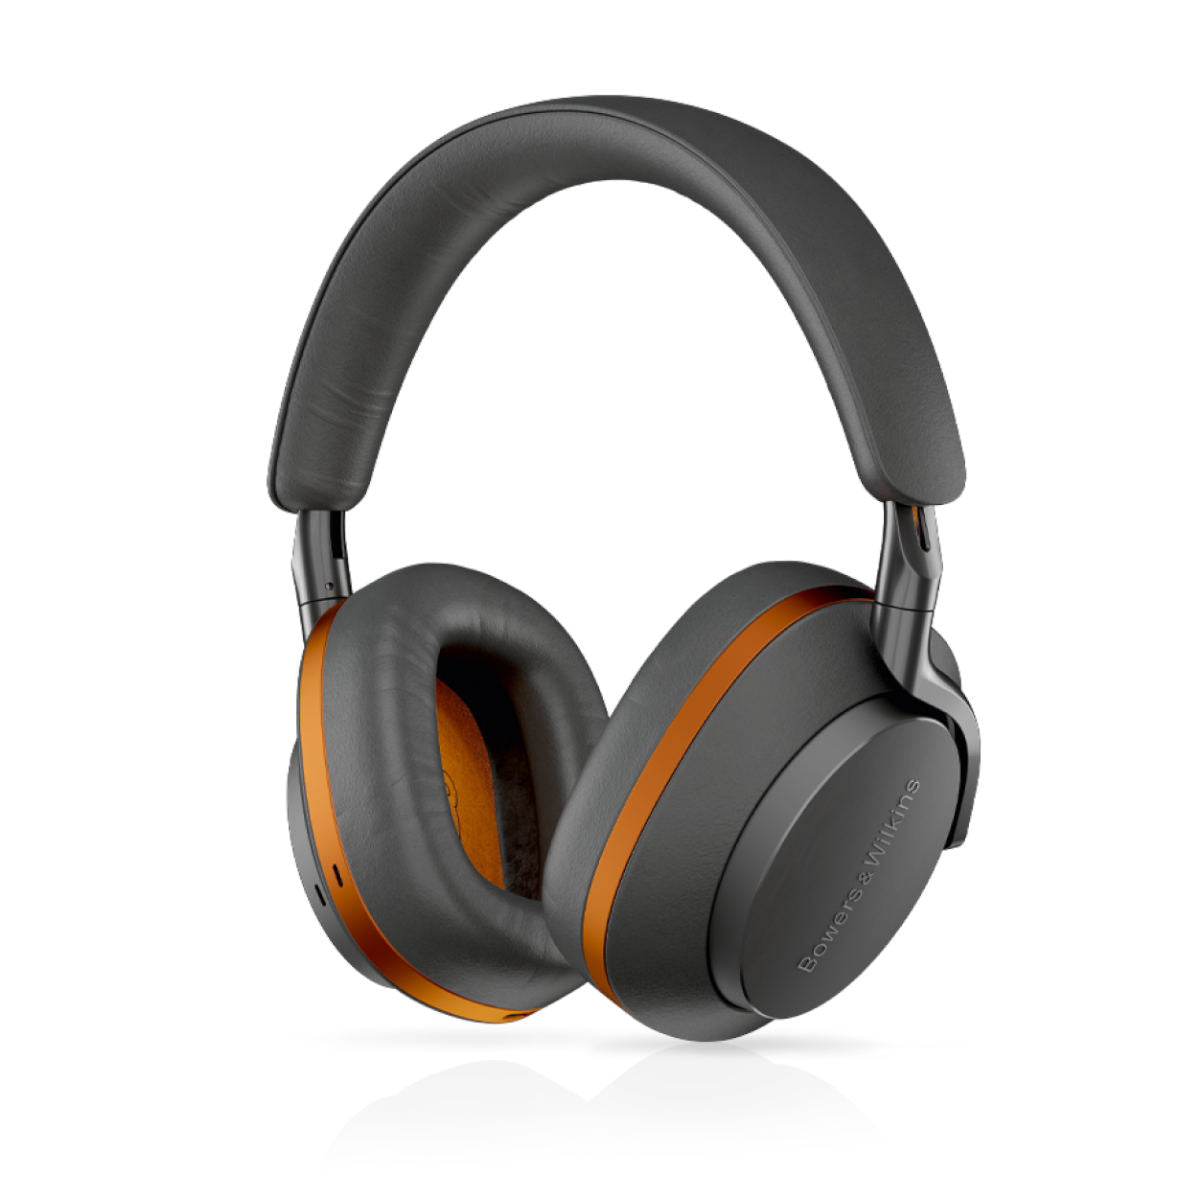 Bowers & Wilkins (B&W) Px8 McLaren Edition Over-ear Noise Cancelling Wireless Headphones